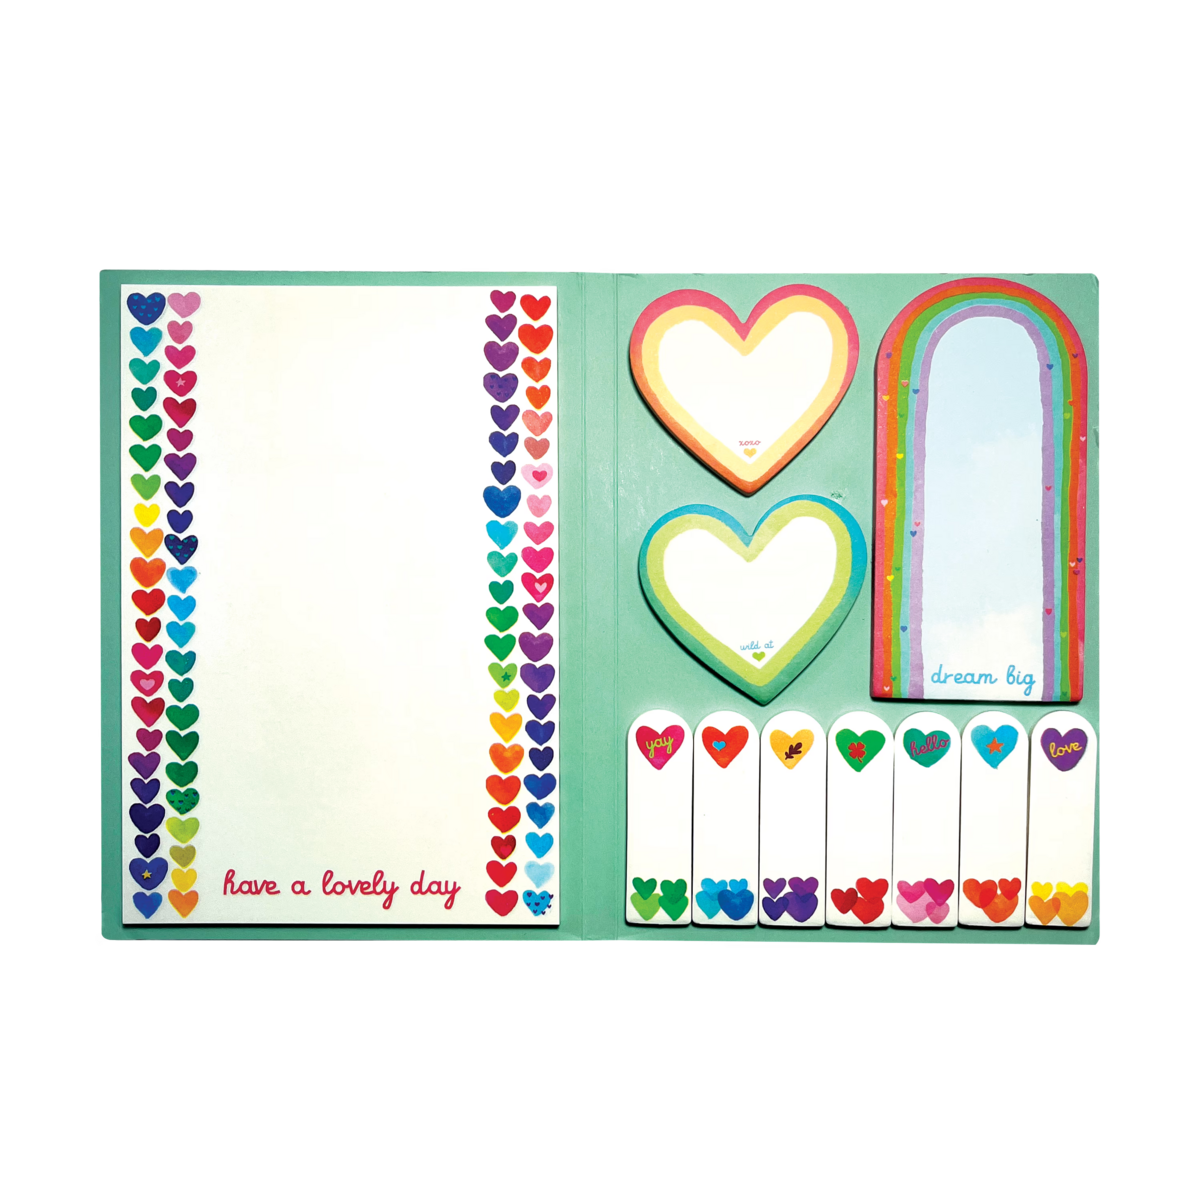 Side Notes Sticky Tab Note Pad - Rainbow Hearts inside of notepad